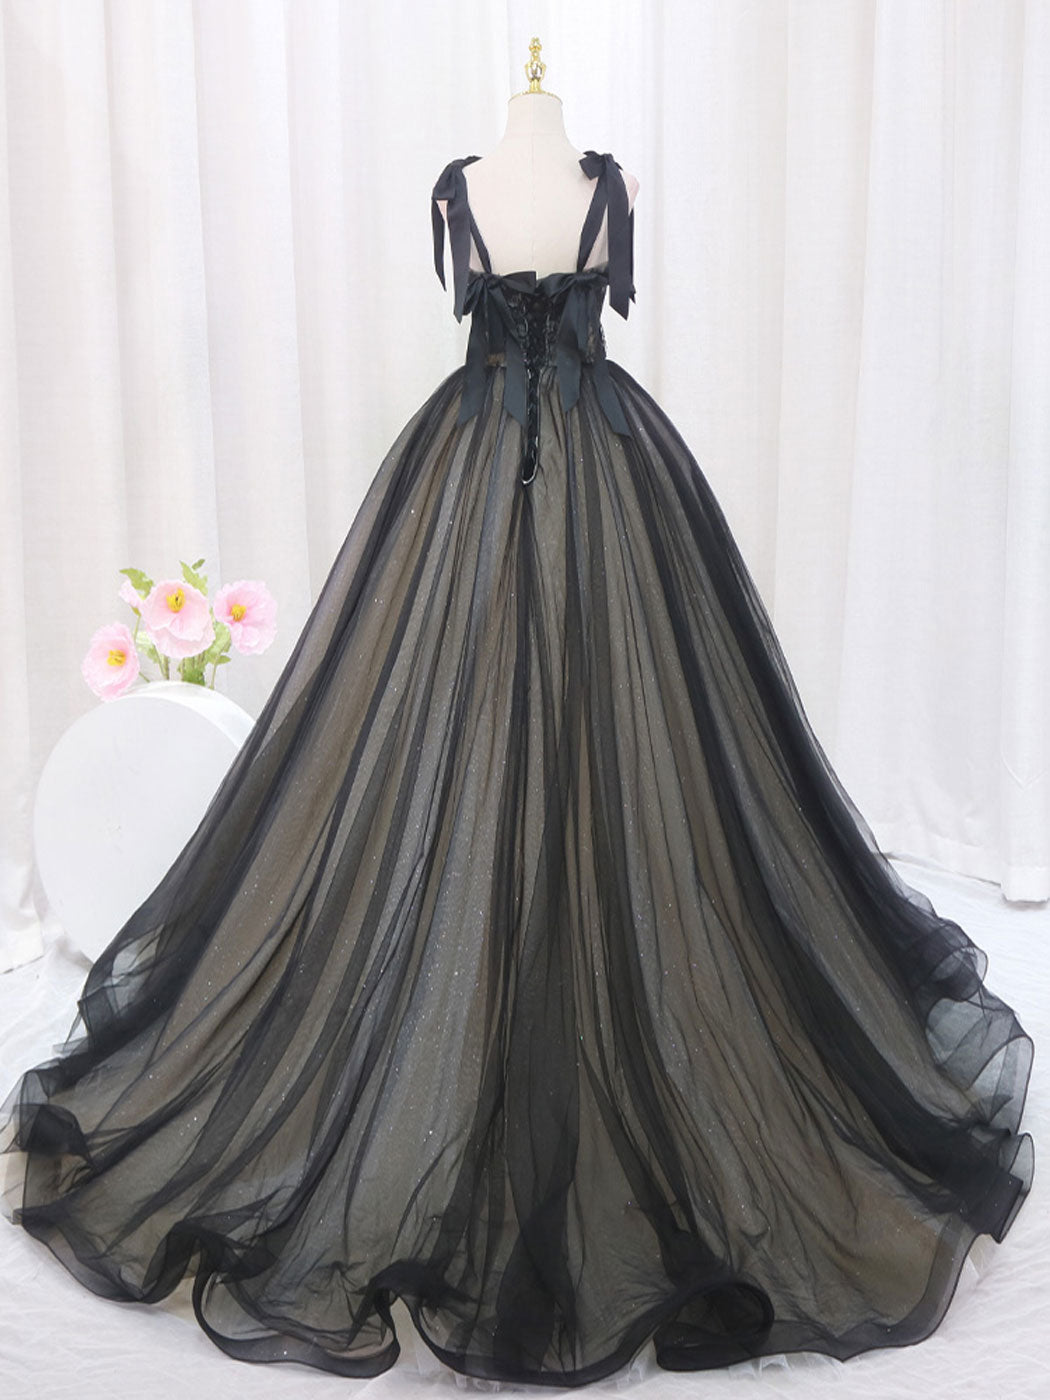 Luxury Vintage Gothic Black Lace Black Ballgown Wedding Dress With Off  Shoulder Ruffles, Draped Tiered Skirt, And Plus Size Option From  Magicdress009, $274.37 | DHgate.Com